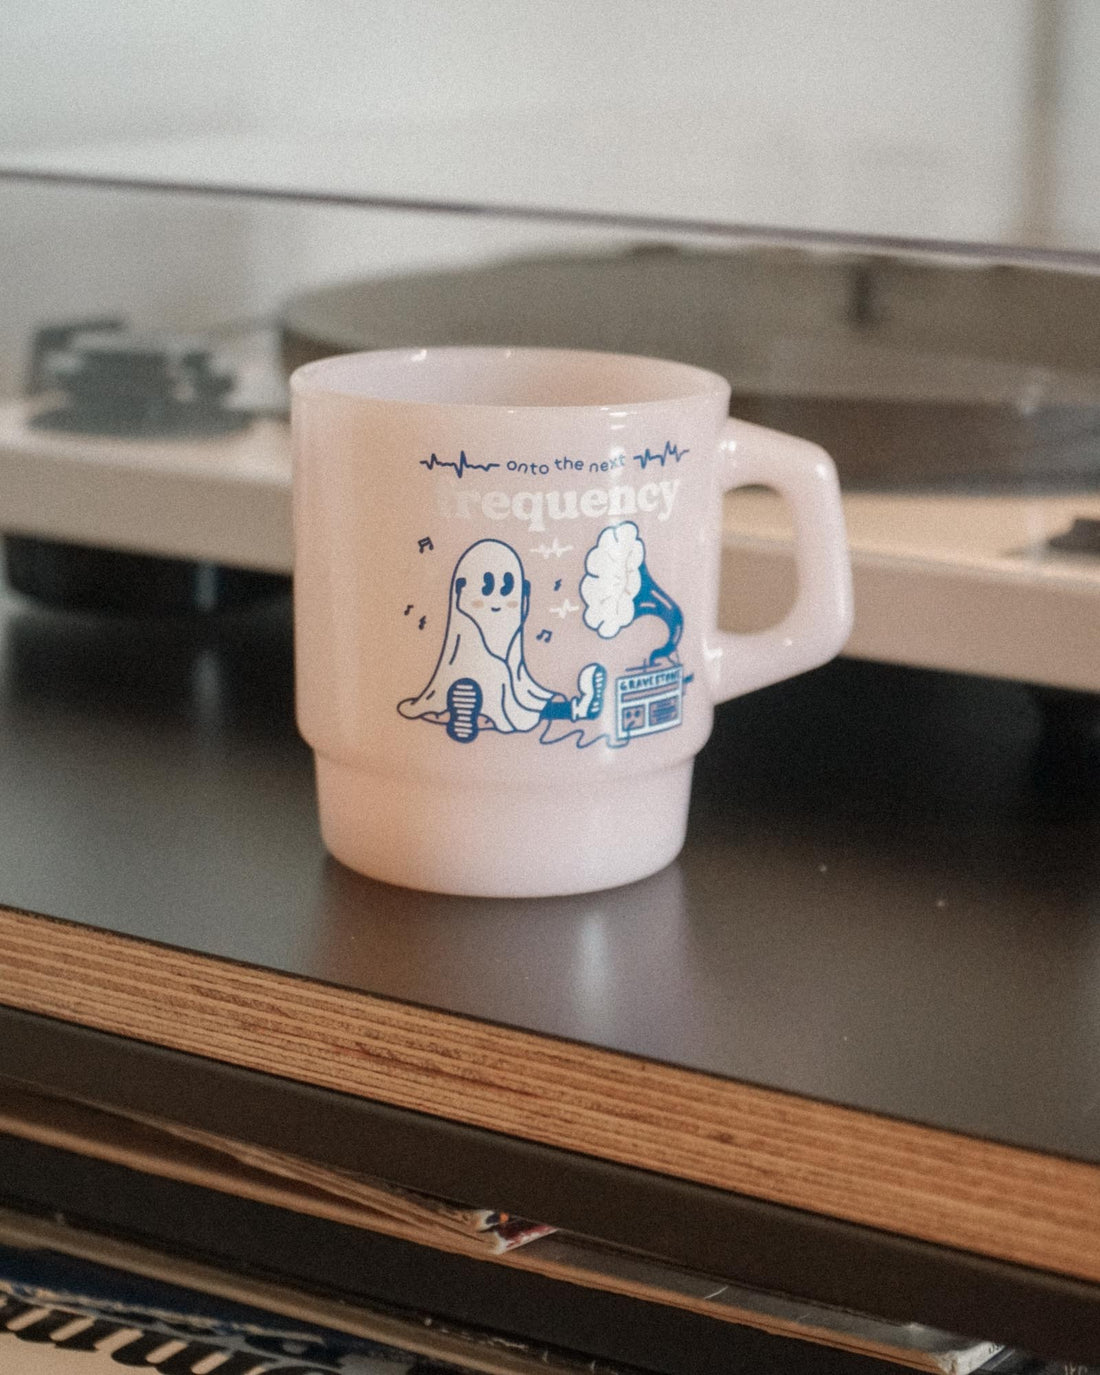 &quot;Onto the Next Frequency&quot; Spooky Diner Mug